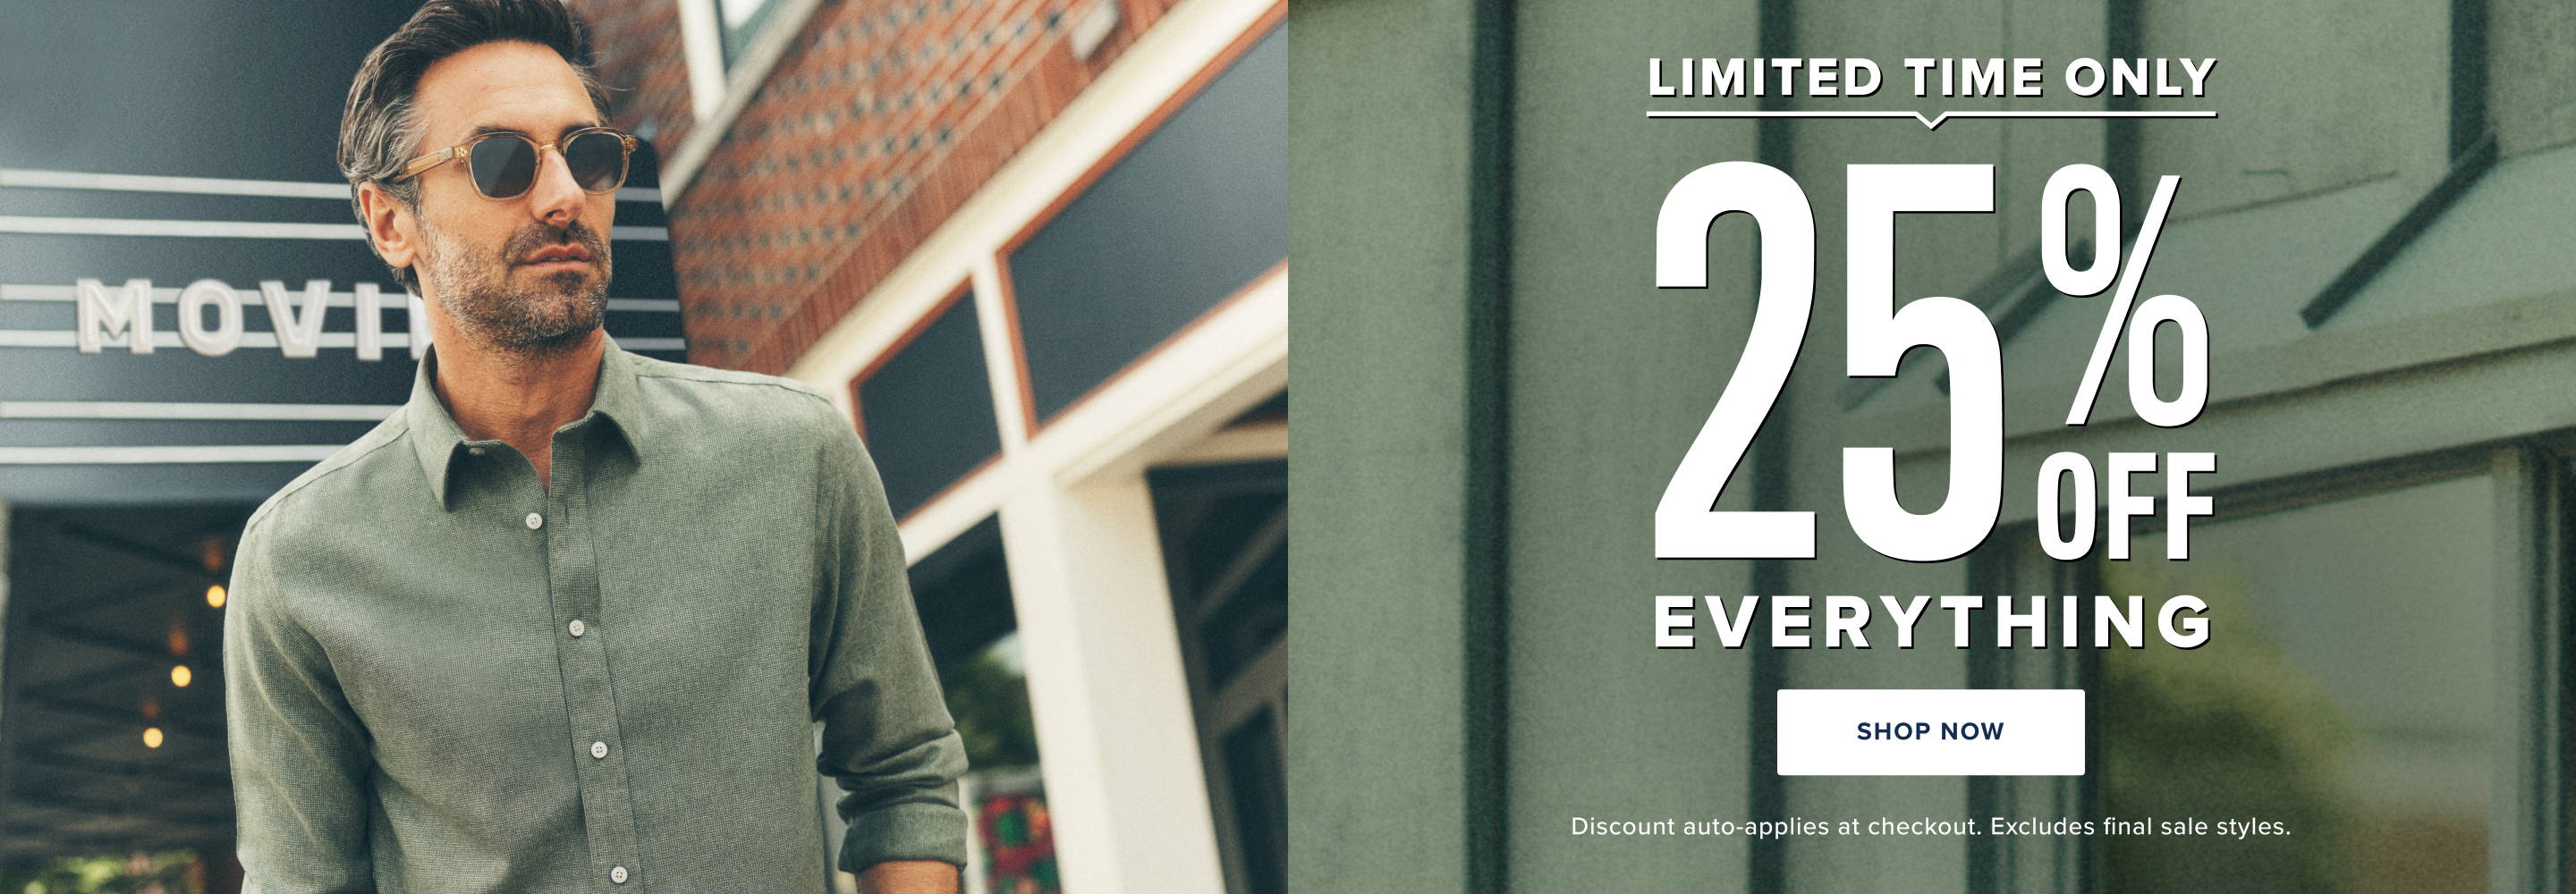 Limited time only. 25% Off everything. 